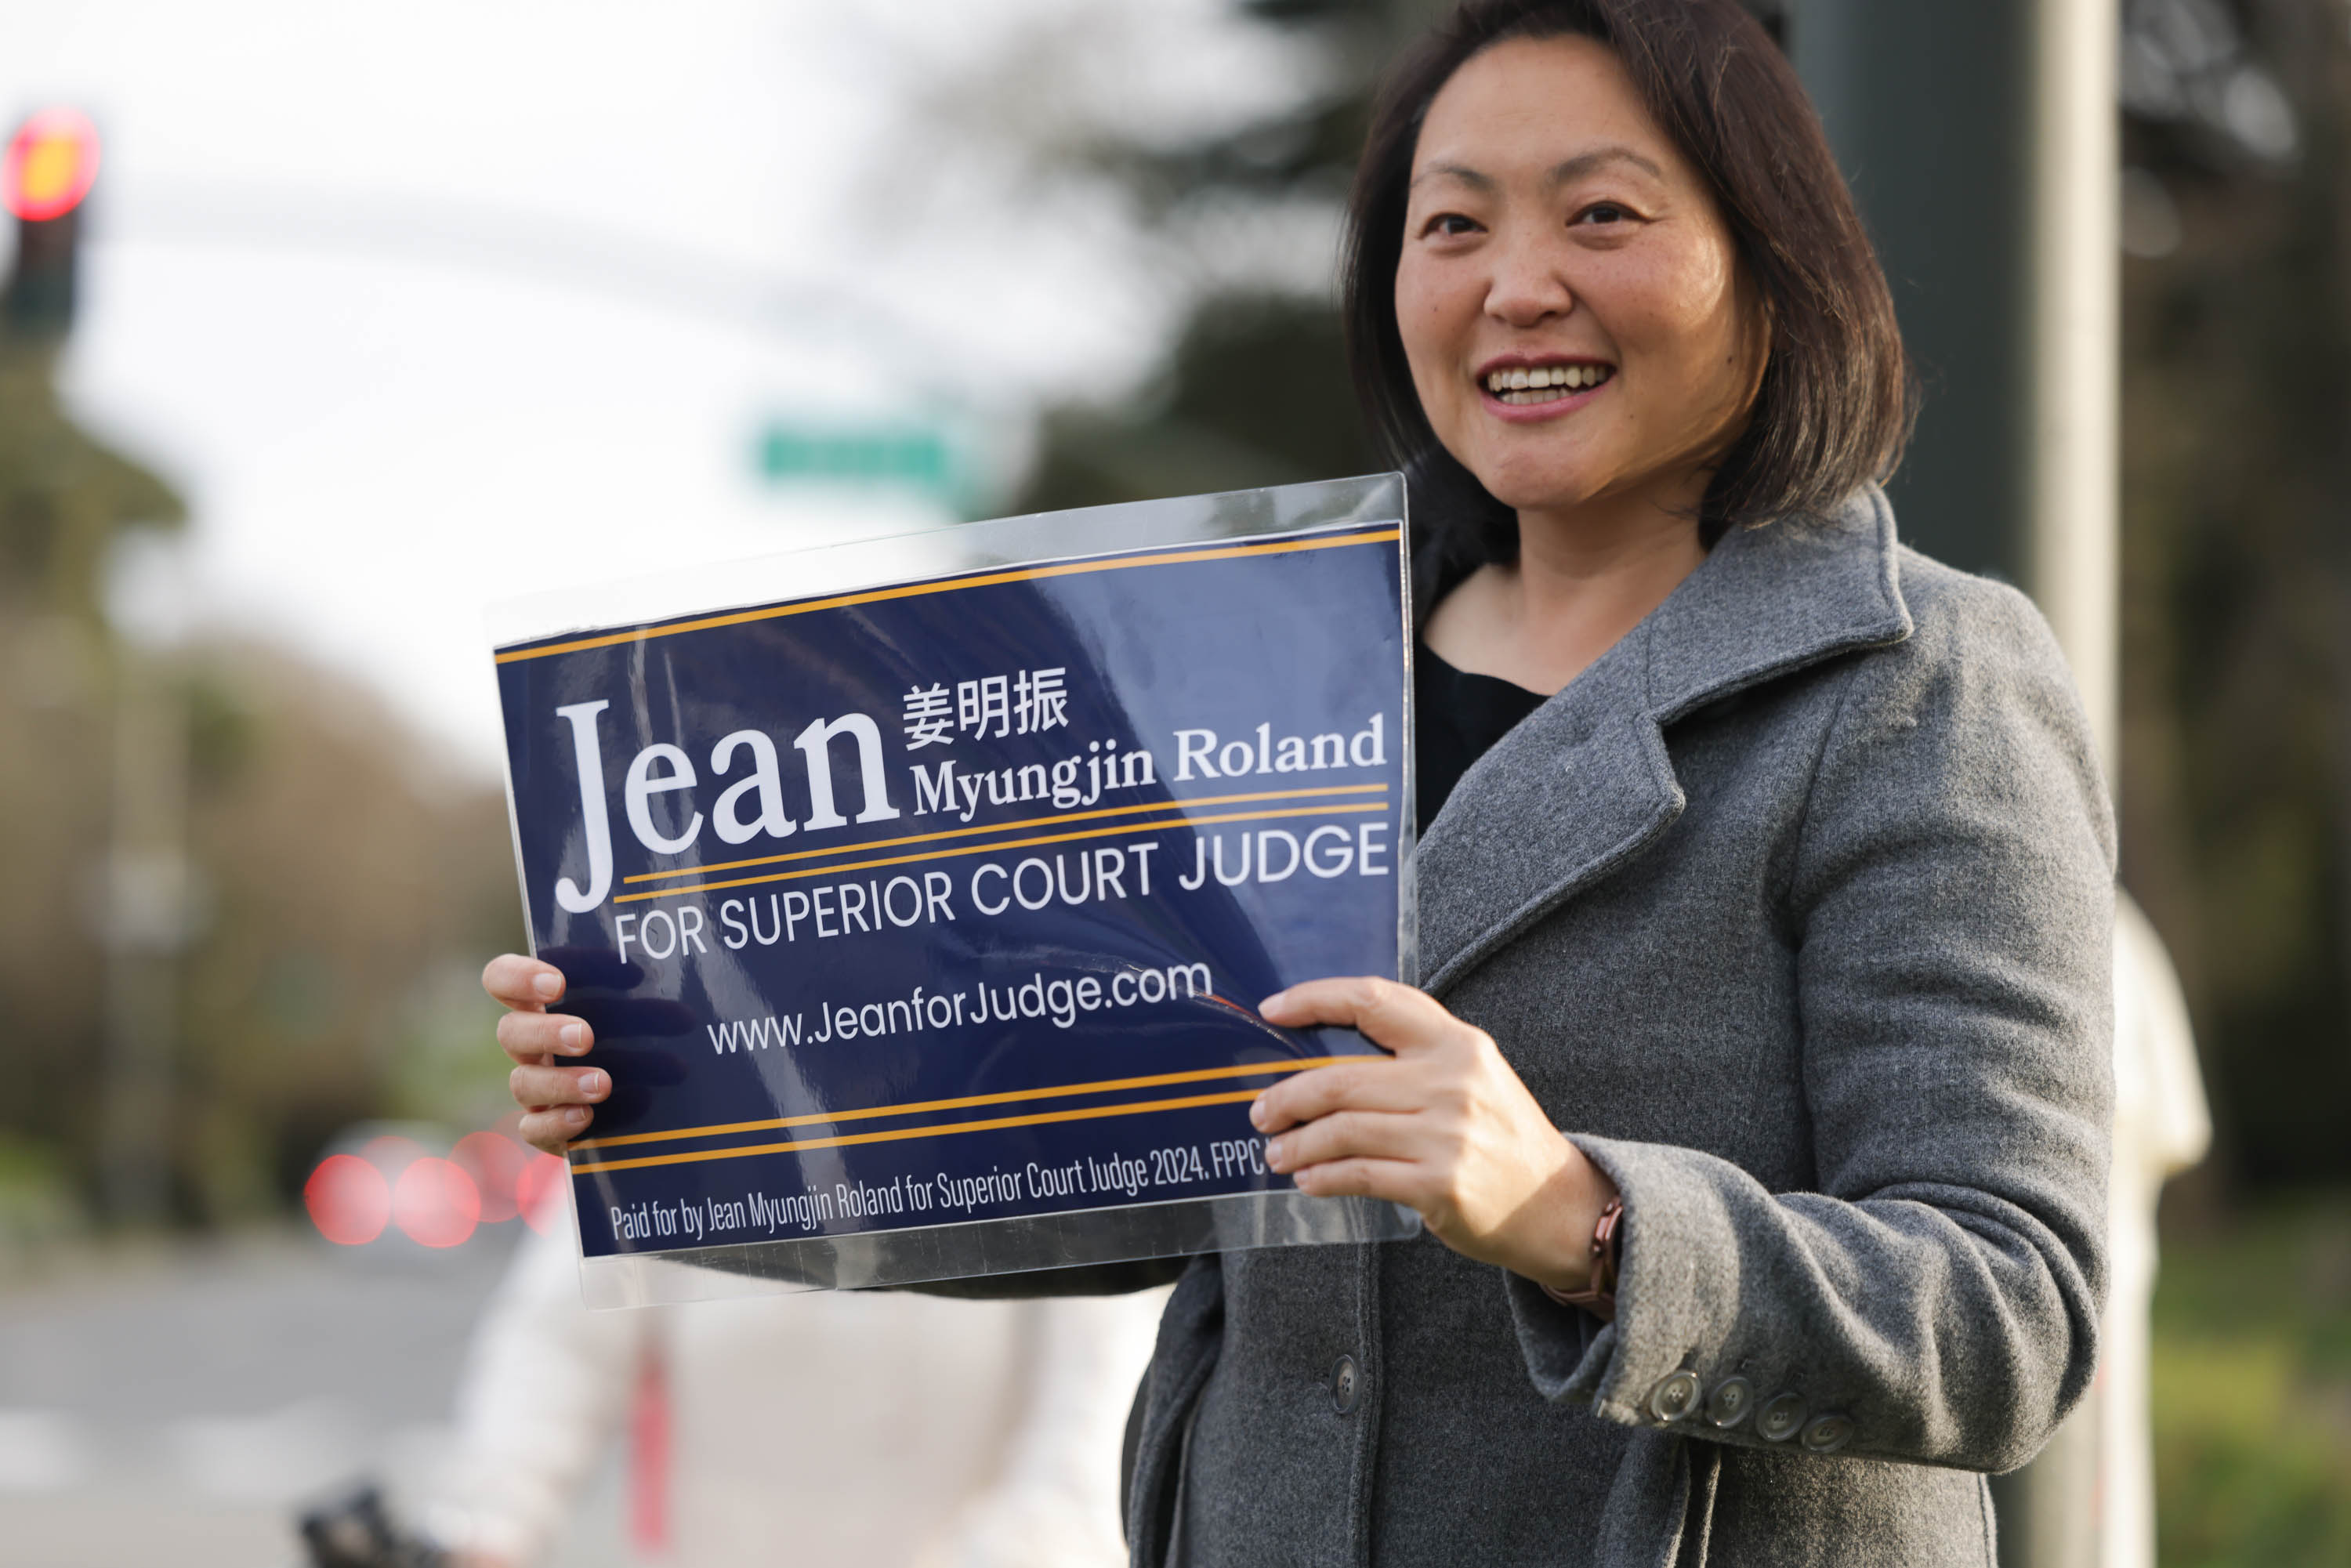 A smiling woman holds a campaign sign for a judicial candidate.